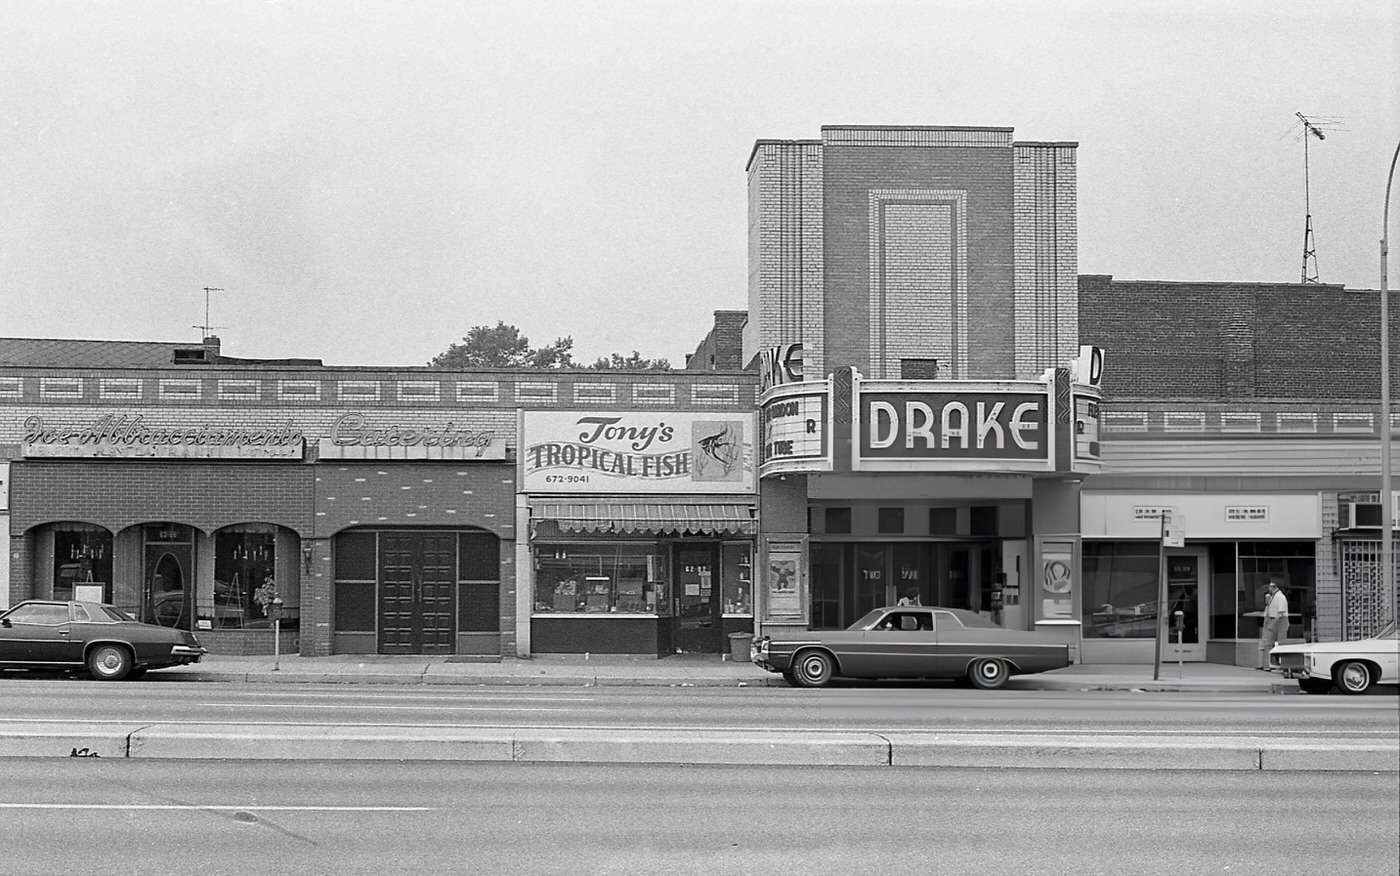 Drake Movie Theater On Woodhaven Boulevard In Queens' Rego Park, 1975.